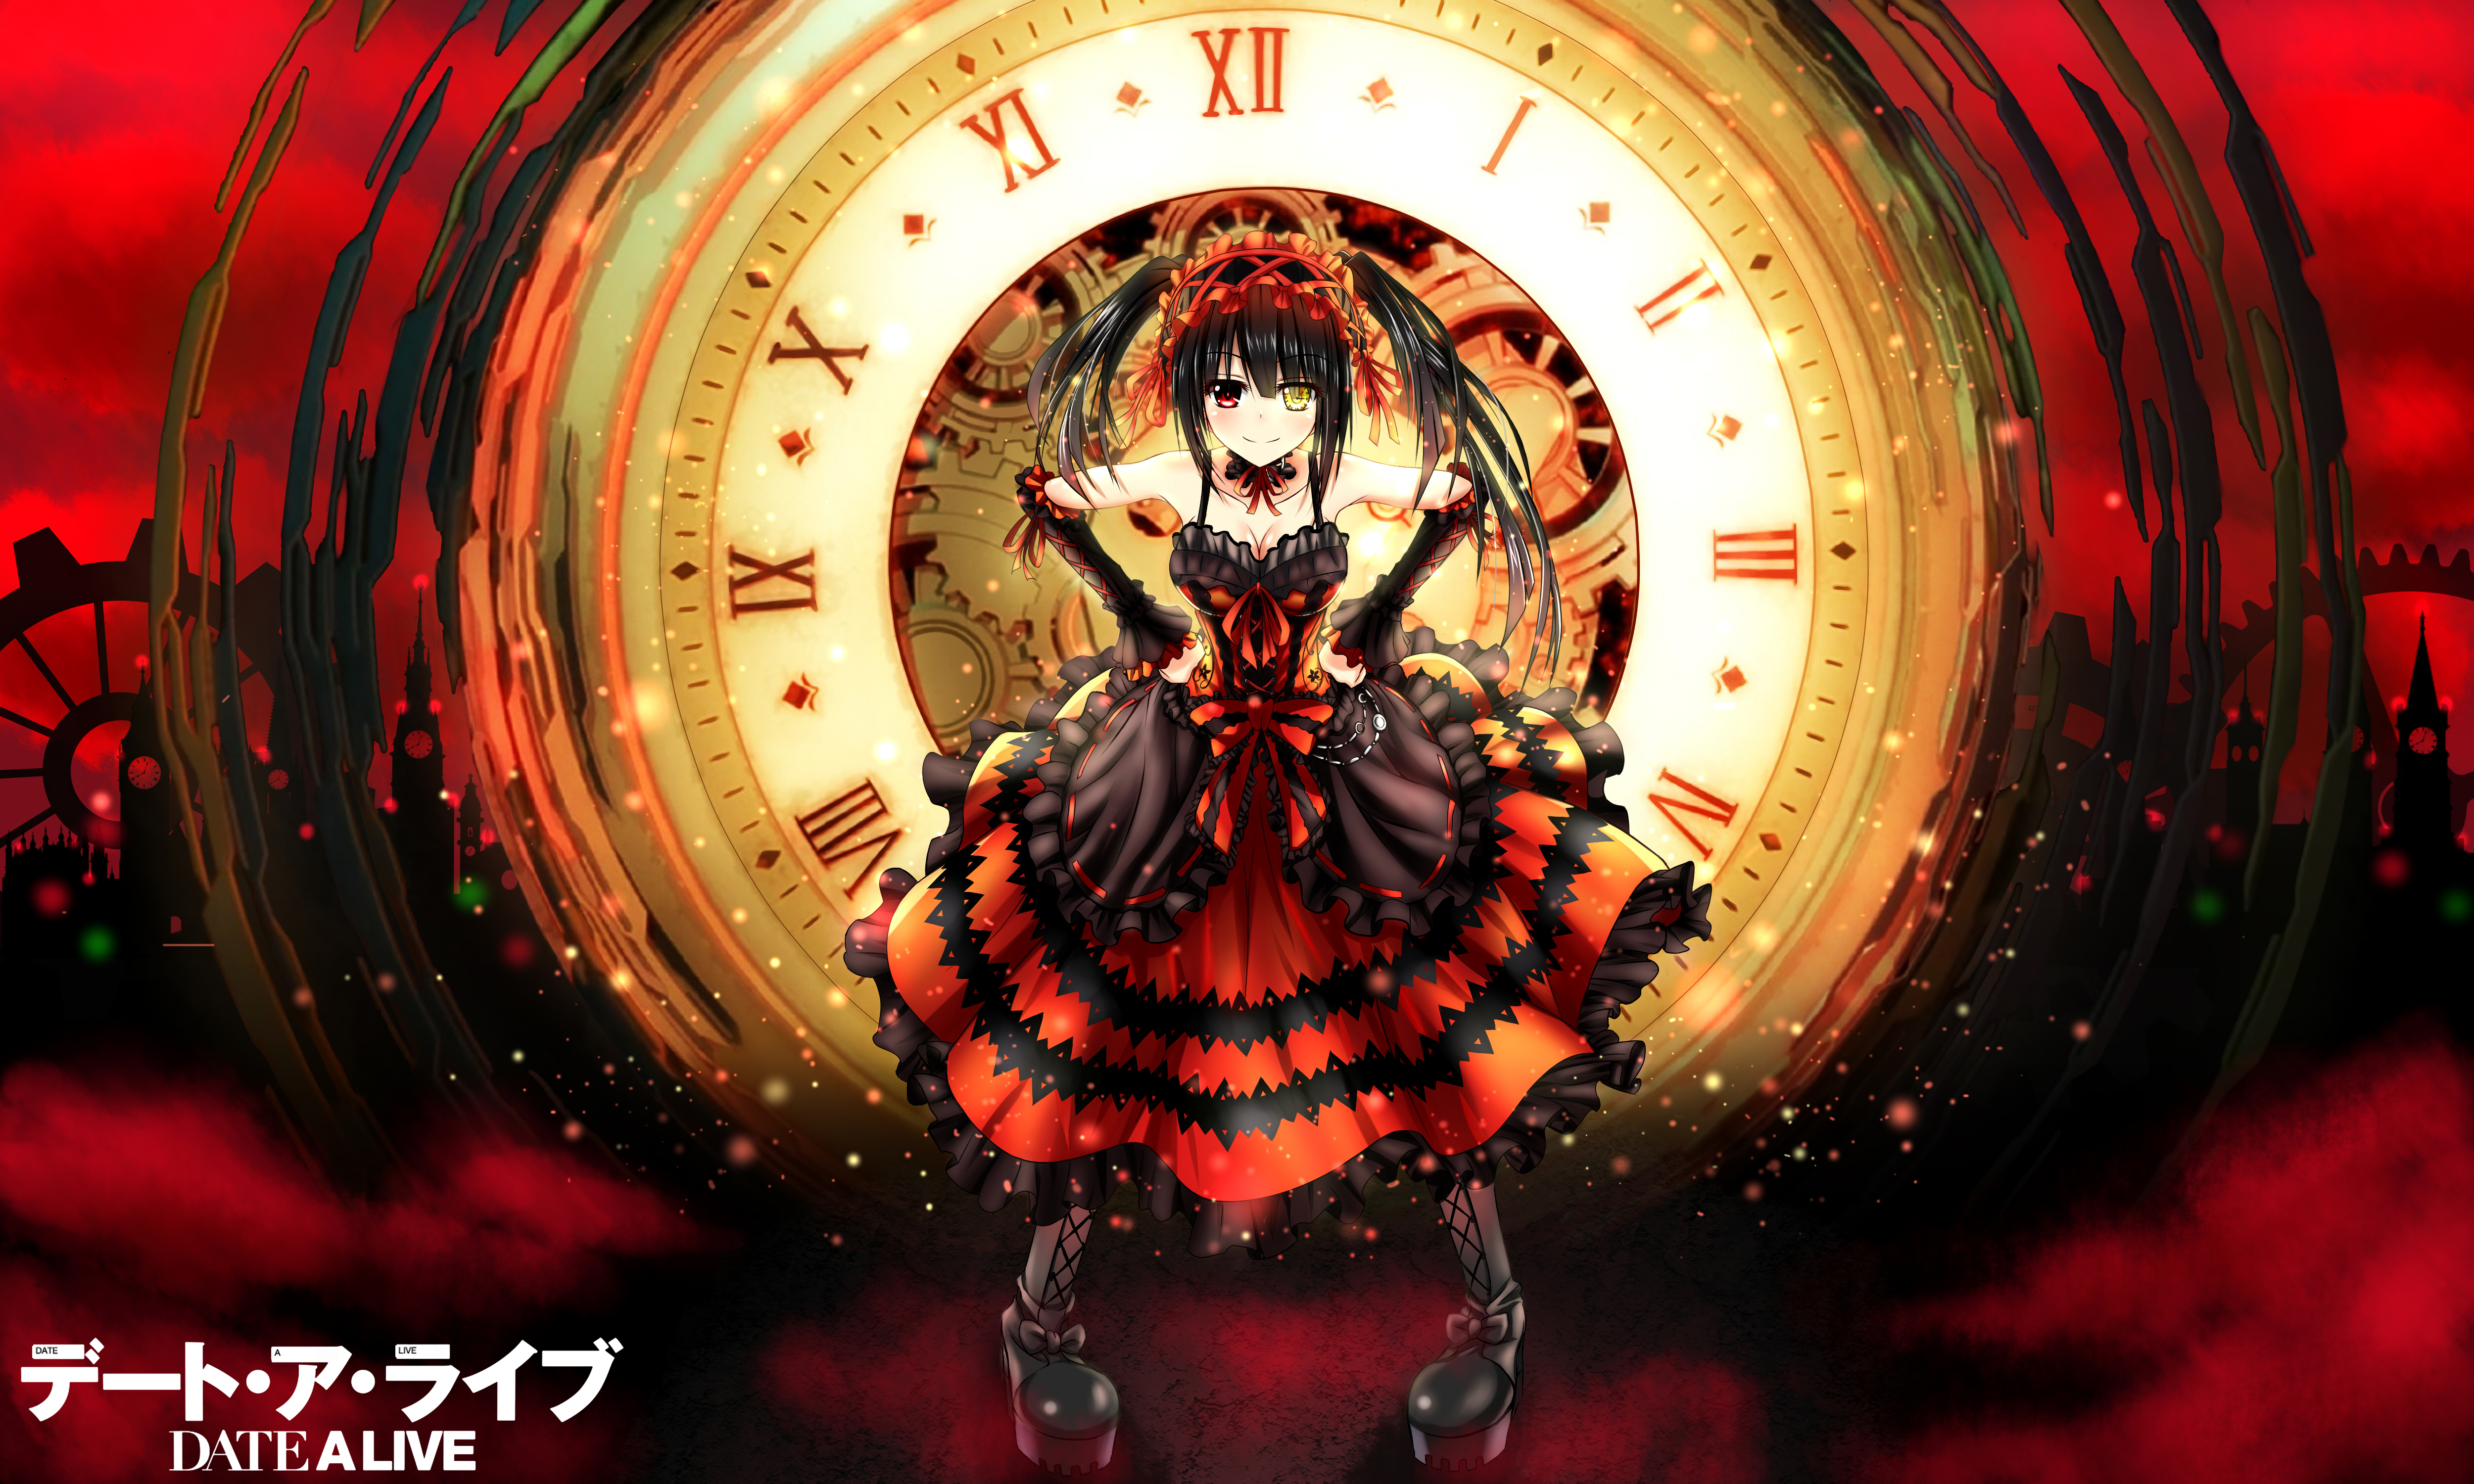 520+ Date A Live HD Wallpapers and Backgrounds